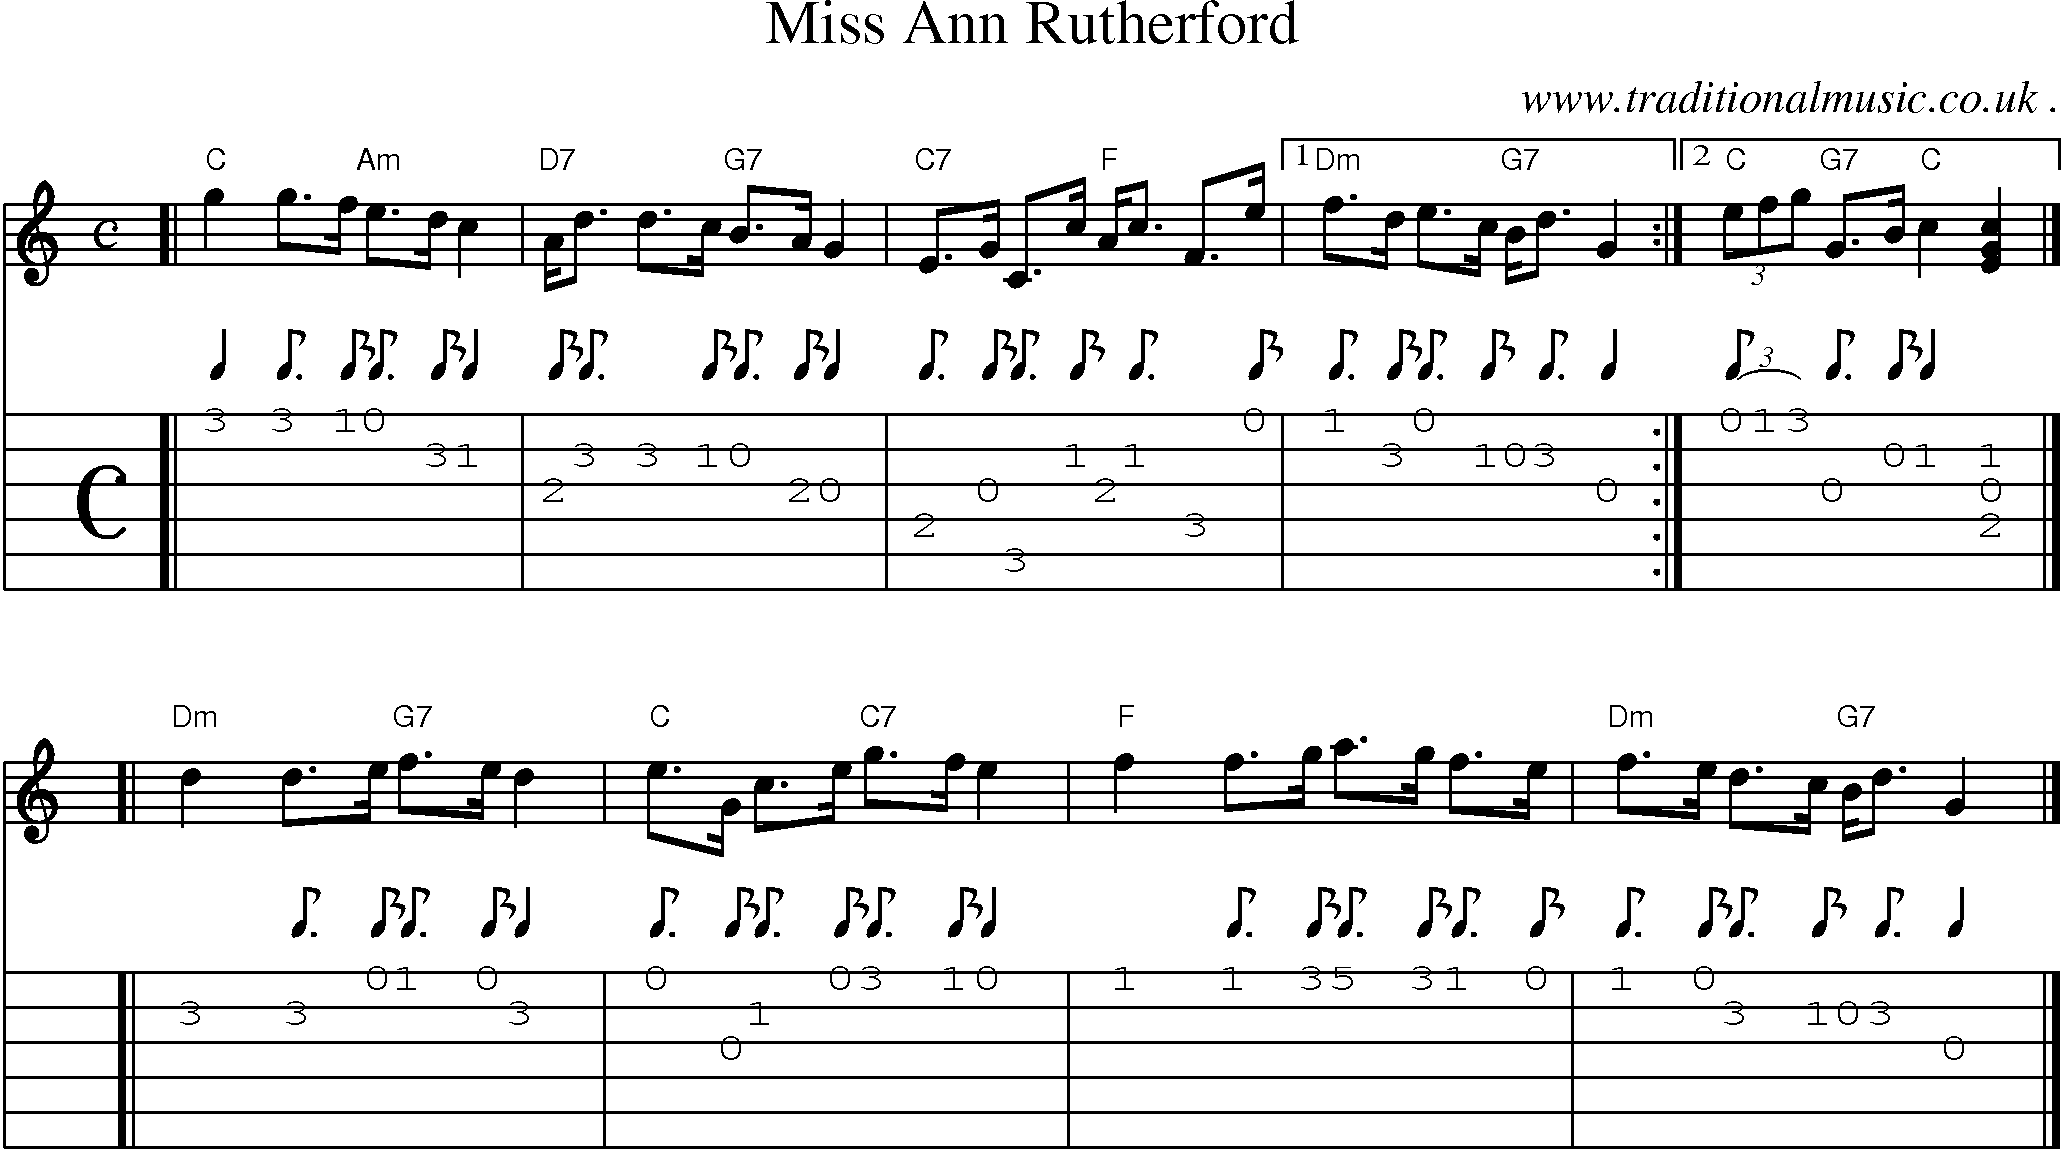 Sheet-music  score, Chords and Guitar Tabs for Miss Ann Rutherford